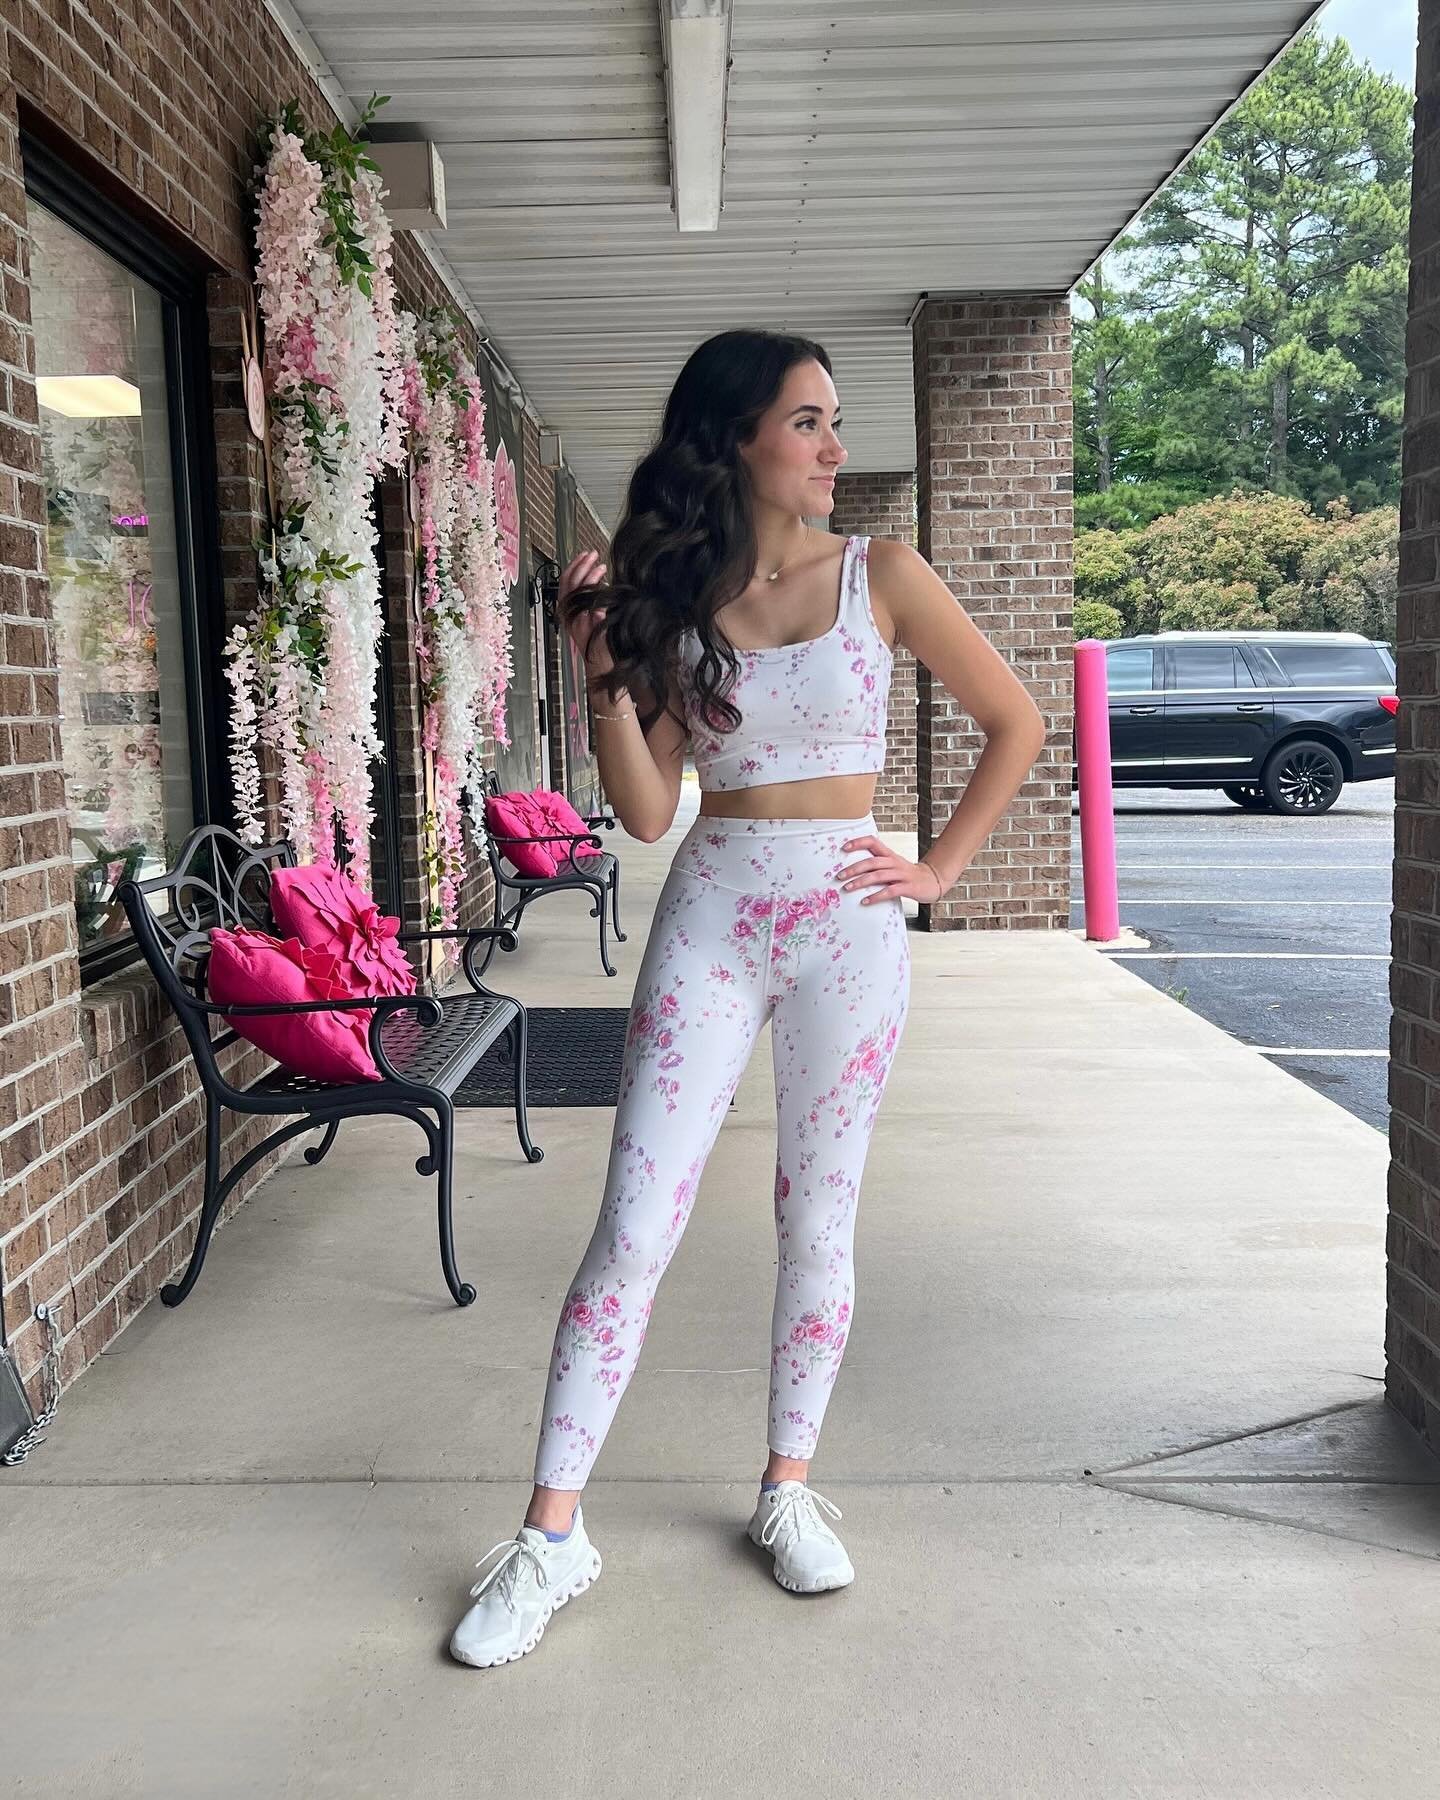 Working on your summer body? May as well do it in style with this adorable workout set from @loveshackfancy 💐💪 
Shop in multiple sizes in store now!!! #AATRNC 

#aatrnc #aatr #dresses #dress #fayettevillenc #northcarolina #raleigh #charlotte #durha